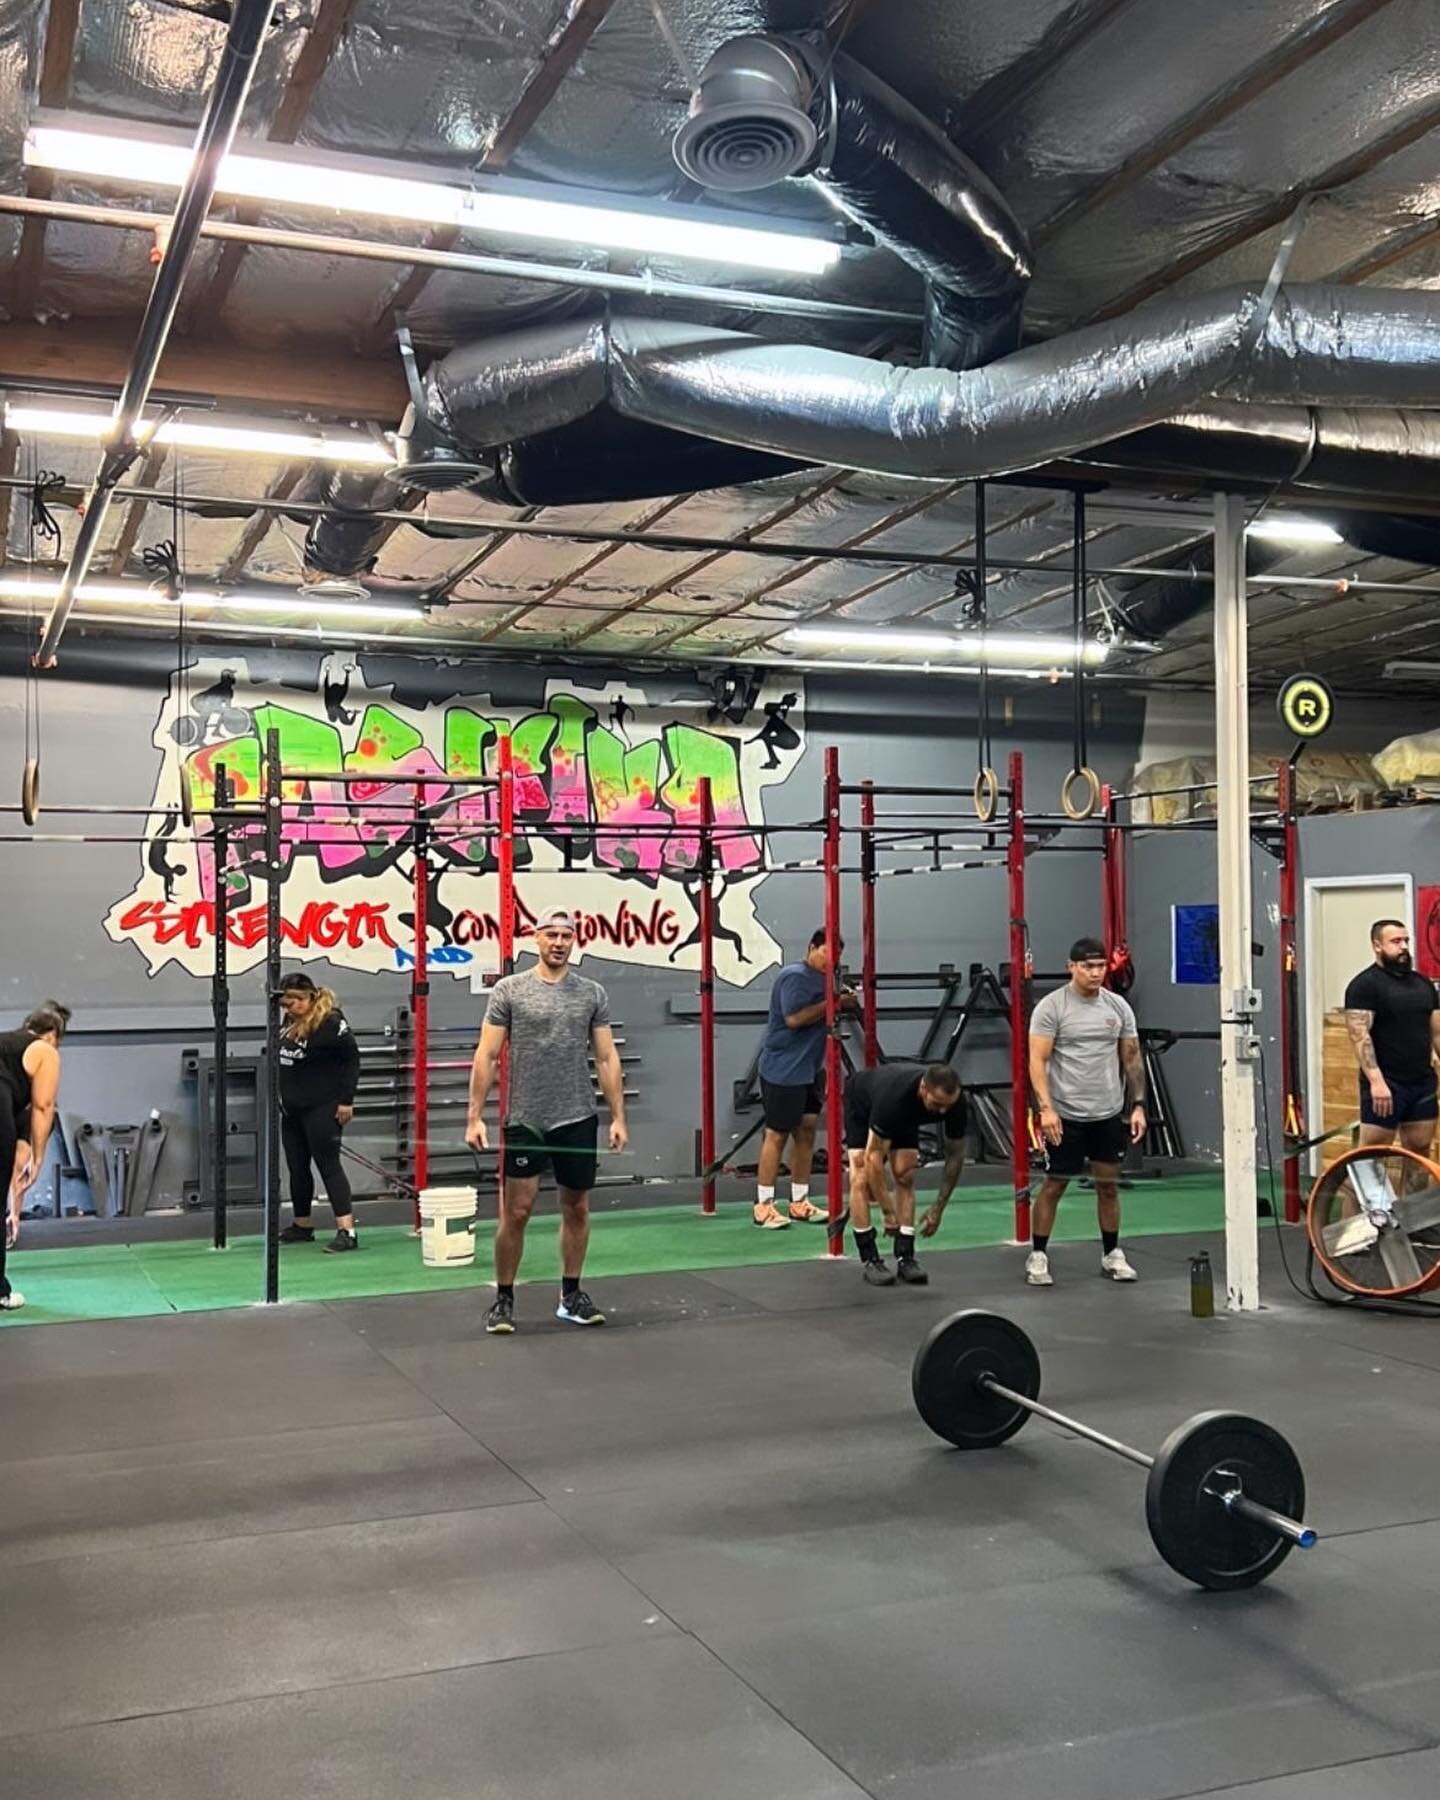 📢 📣📣📢📣📣📣📢📢

Our Competitors Saturday class is back on .
7.30-9.30AM

Come join the fun 🤩 

For all levels &hellip;

#sharktankstrong #cfkaiwai #compclass #strong #fitness #fun #community #crossfit